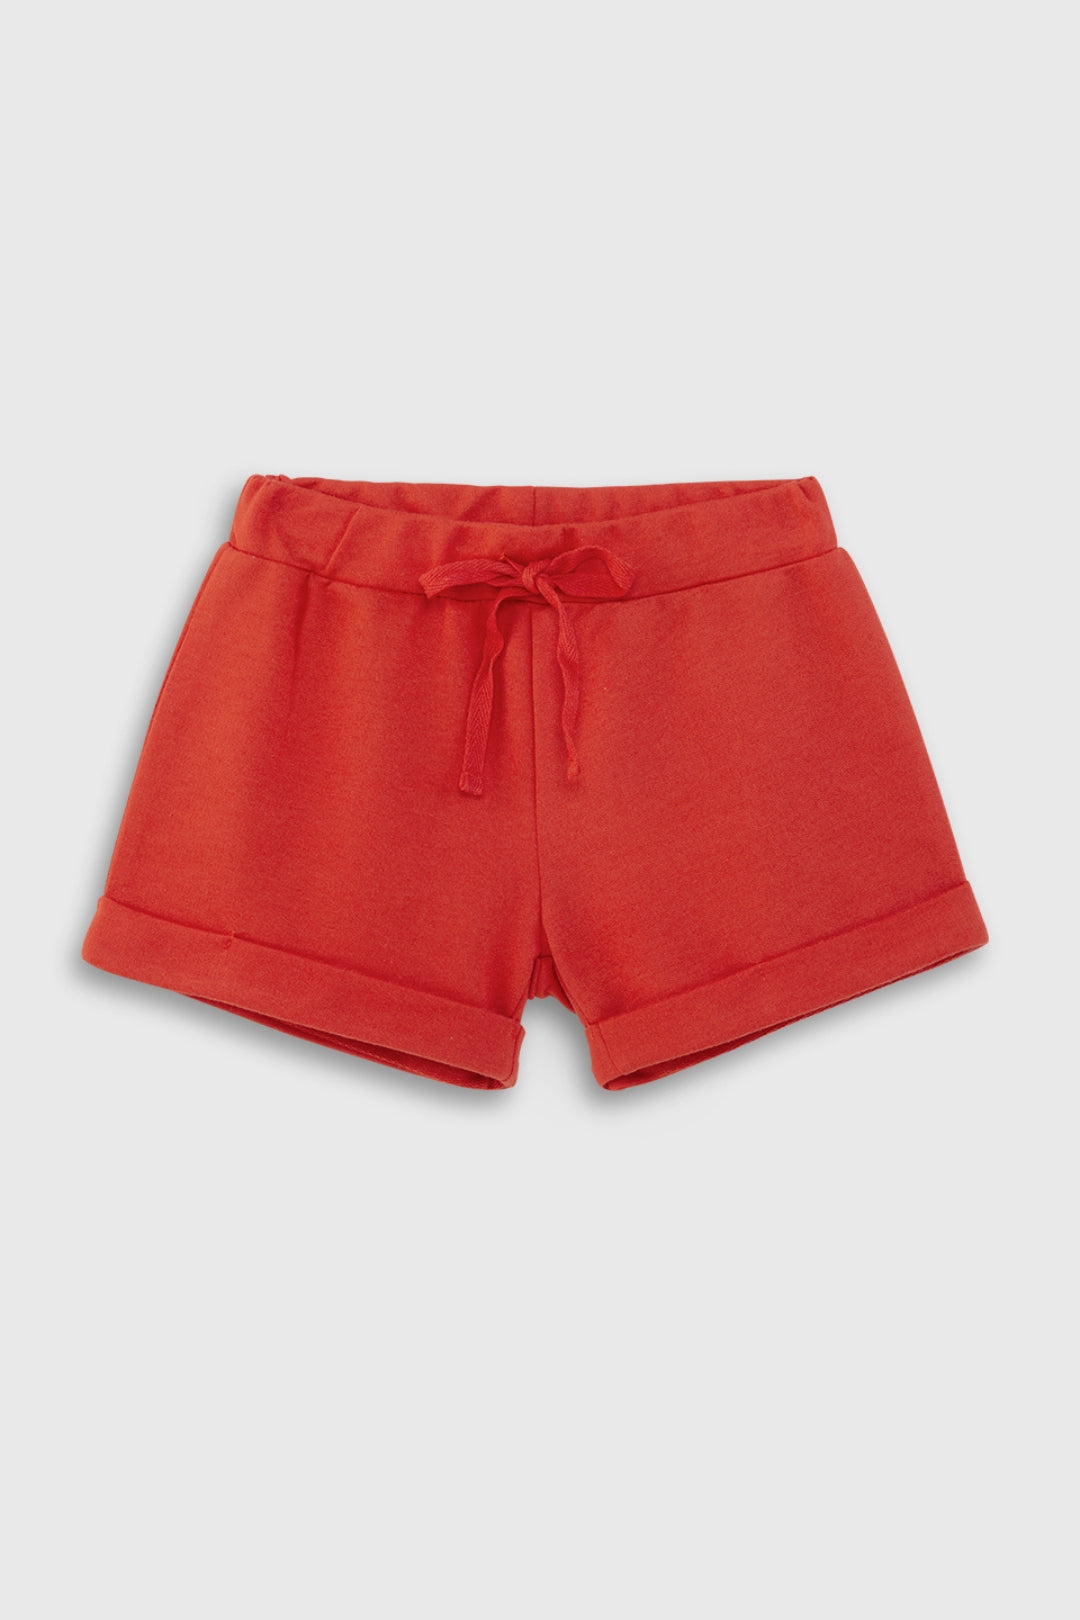 Navy and Orange Shorts Pack of 2